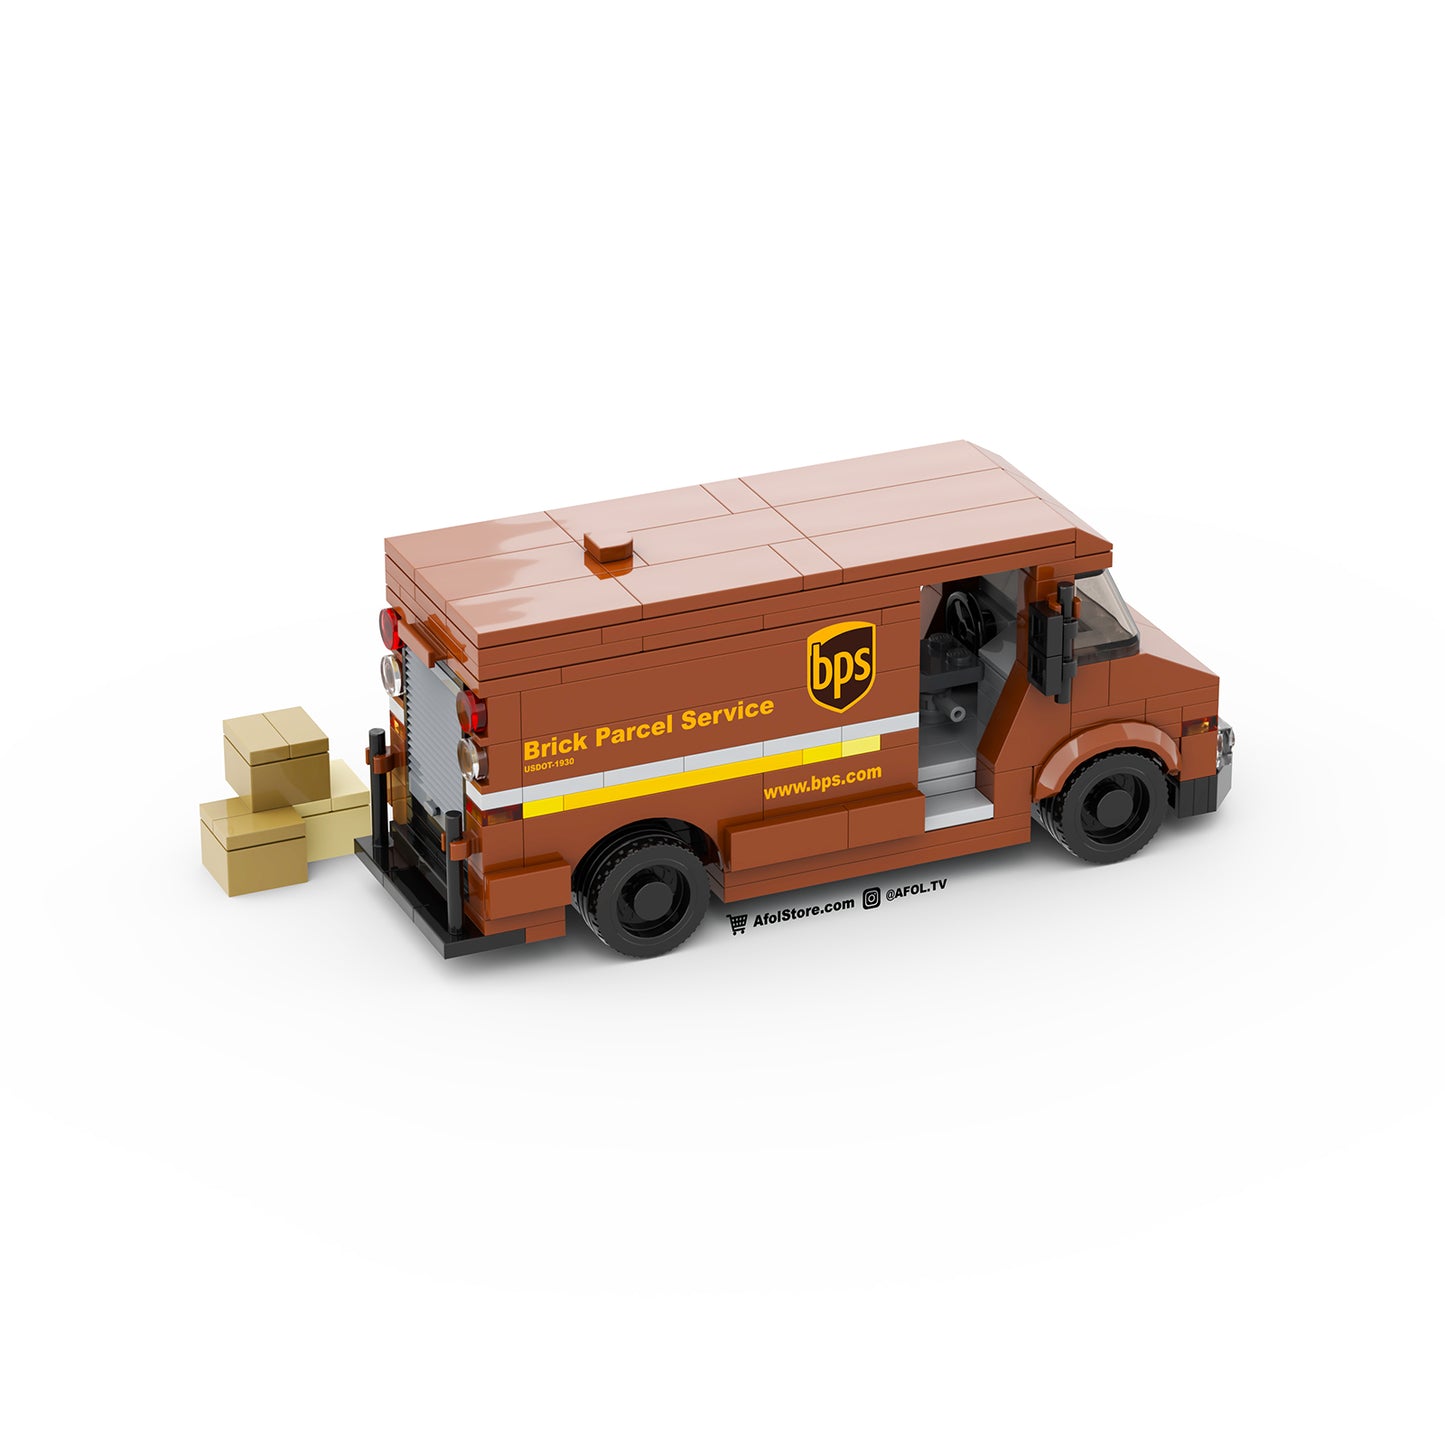 BPS Delivery Truck